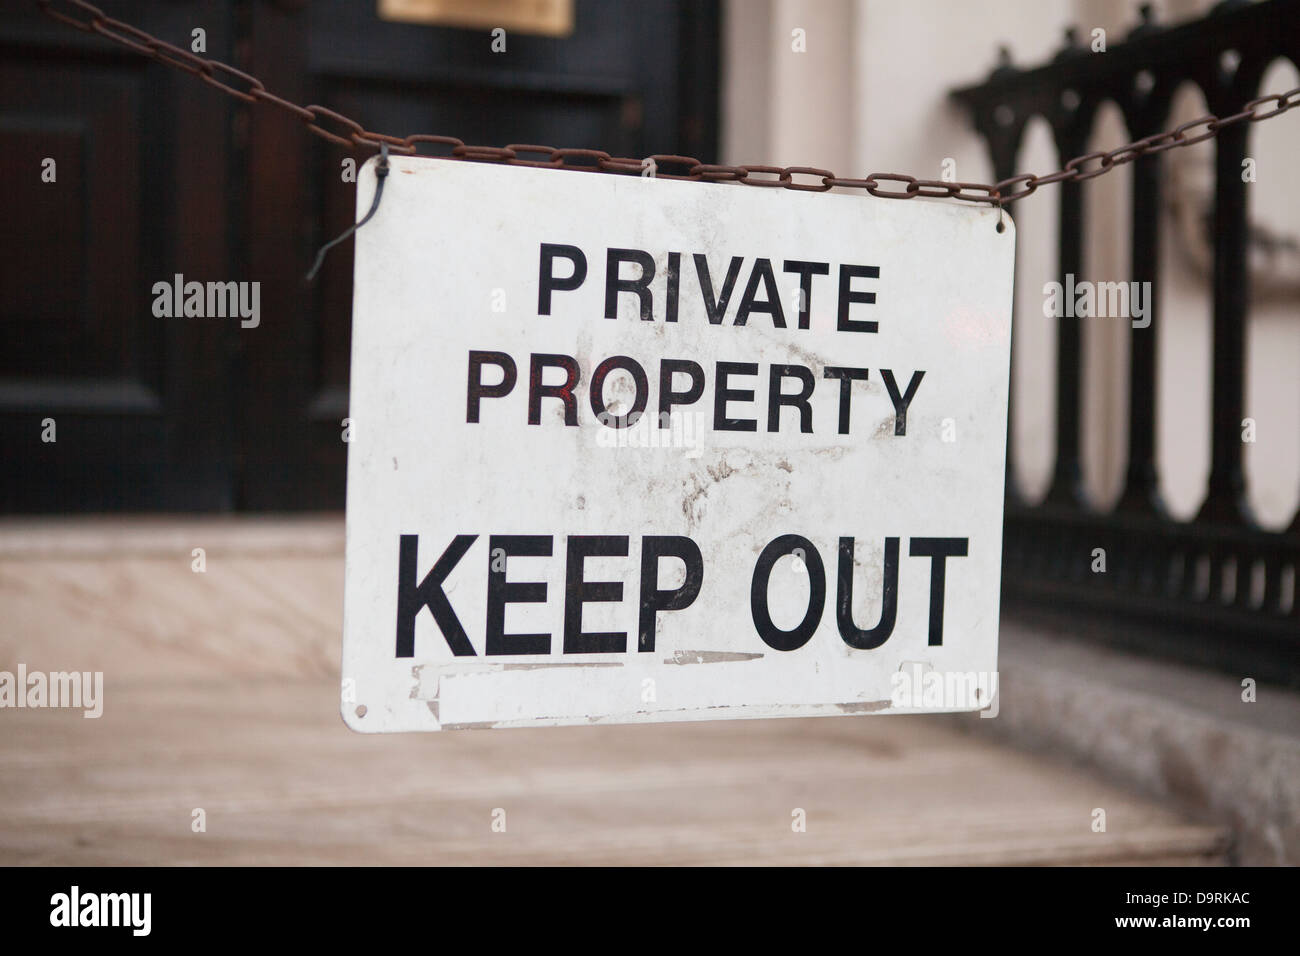 Keep out sign Stock Photo